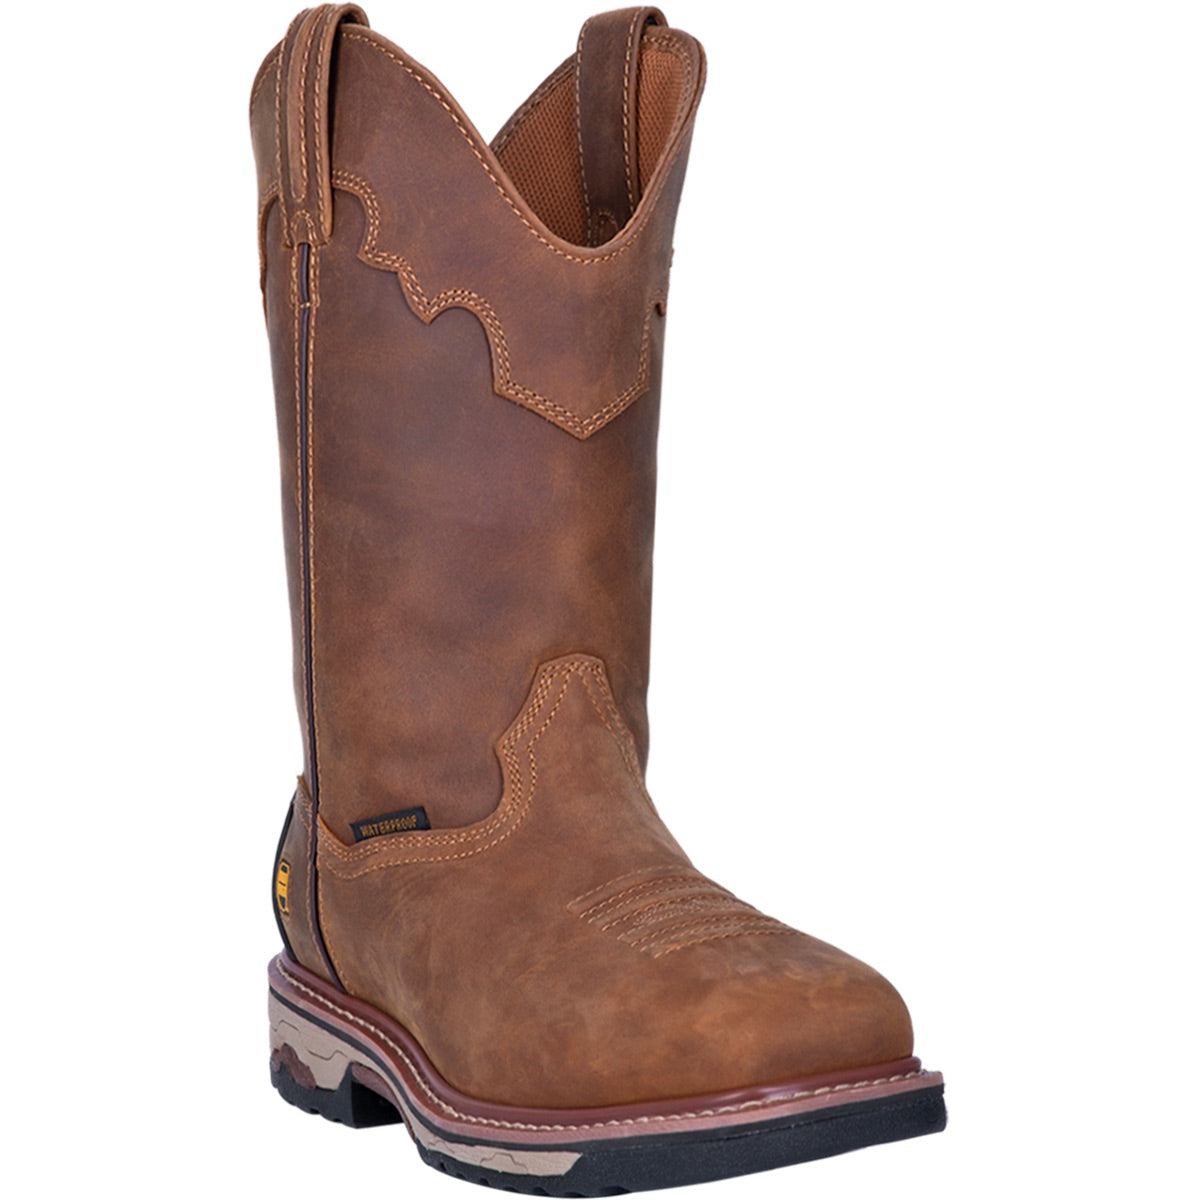 The Blayde is your go-to western work boot for comfort and durability. Crafted with saddle tan leather. Keep your foot dry with the waterproof membrane bootie. Featuring the Dan Post DPC Comfort System that with a Removable Orthotic that’s breathable, anti-fungal, anti-microbial and machine washable. Also features a broad square toe and an Ultra Light heat, oil and slip-resistant outsole.